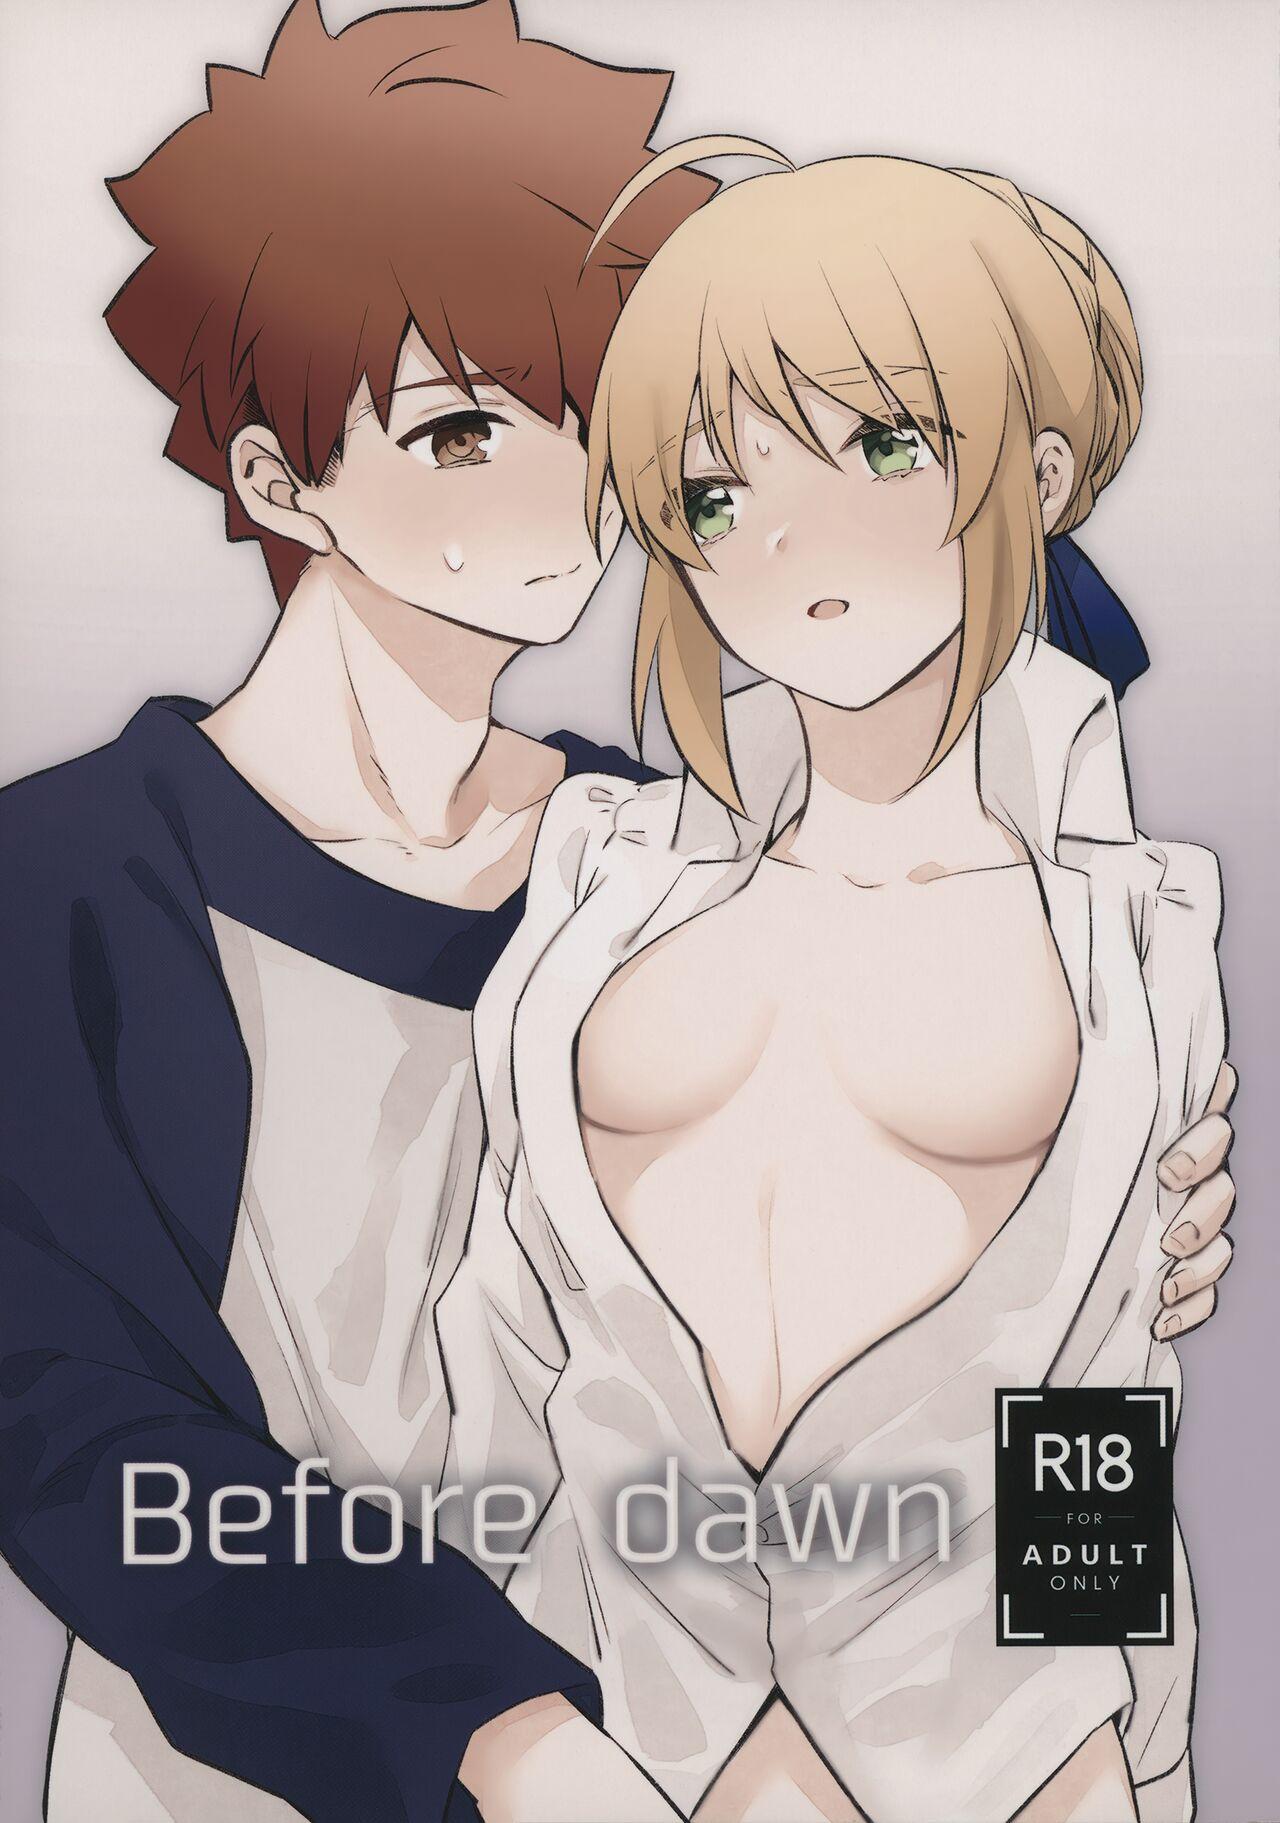 Made Before dawn - Fate stay night Amateur Porn Free - Picture 1